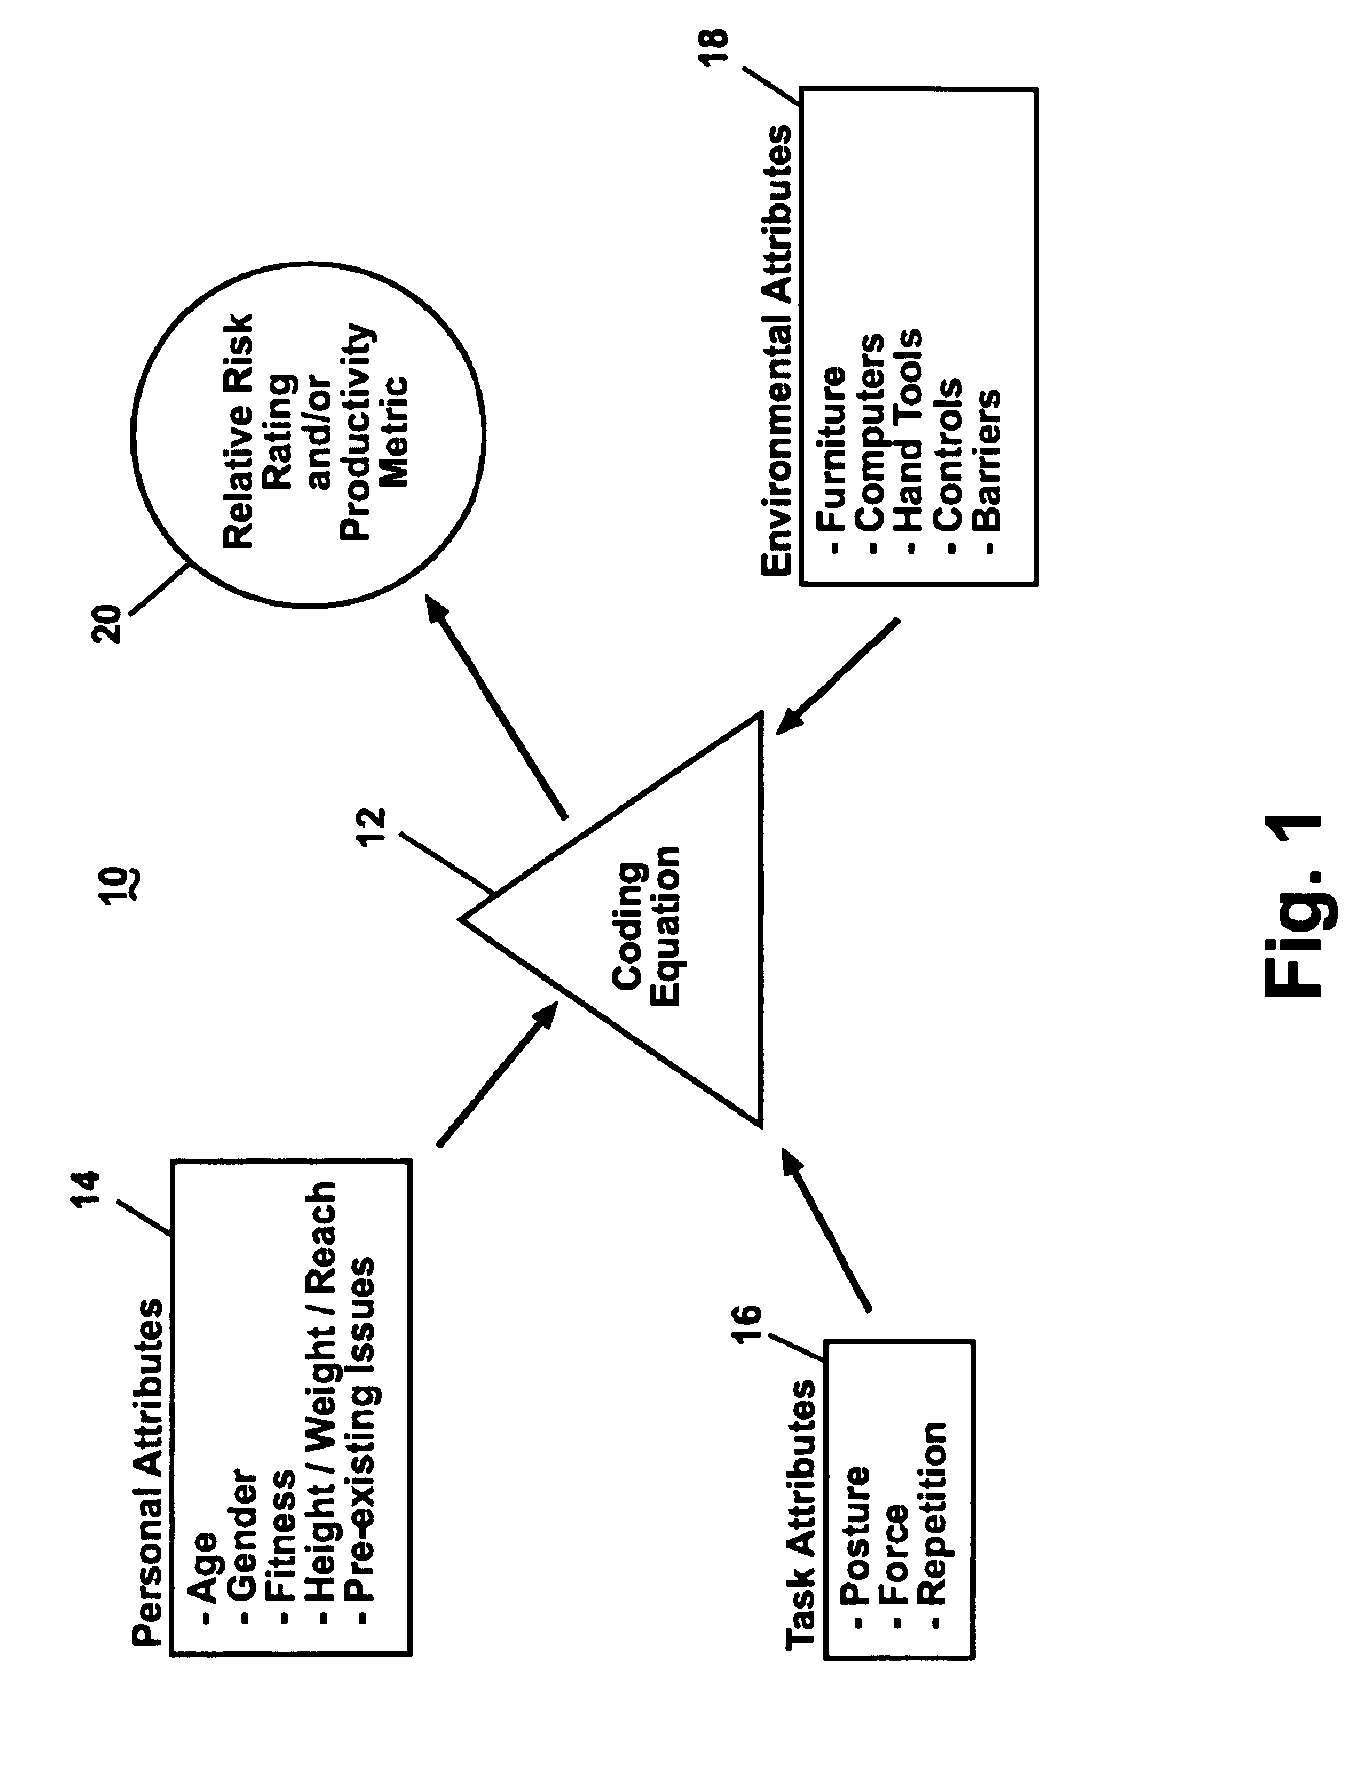 System and method for optimally determining appropriate ergonomics for occupants of a workspace